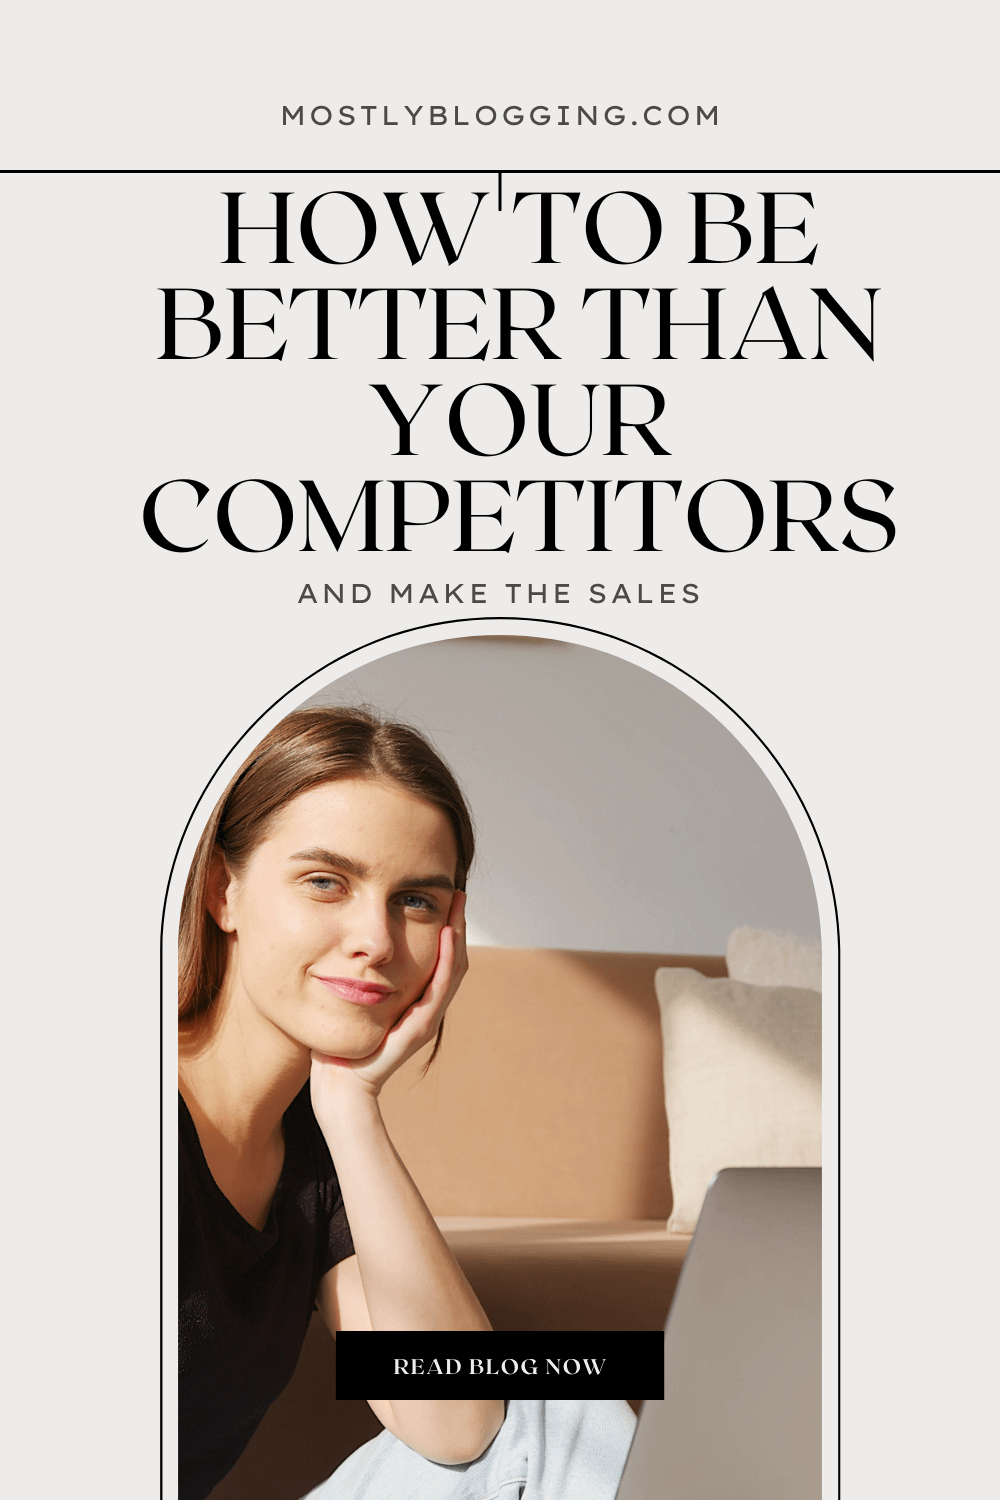 WHY ARE PEOPLE CHOOSING YOU OVER YOUR COMPETITORS?